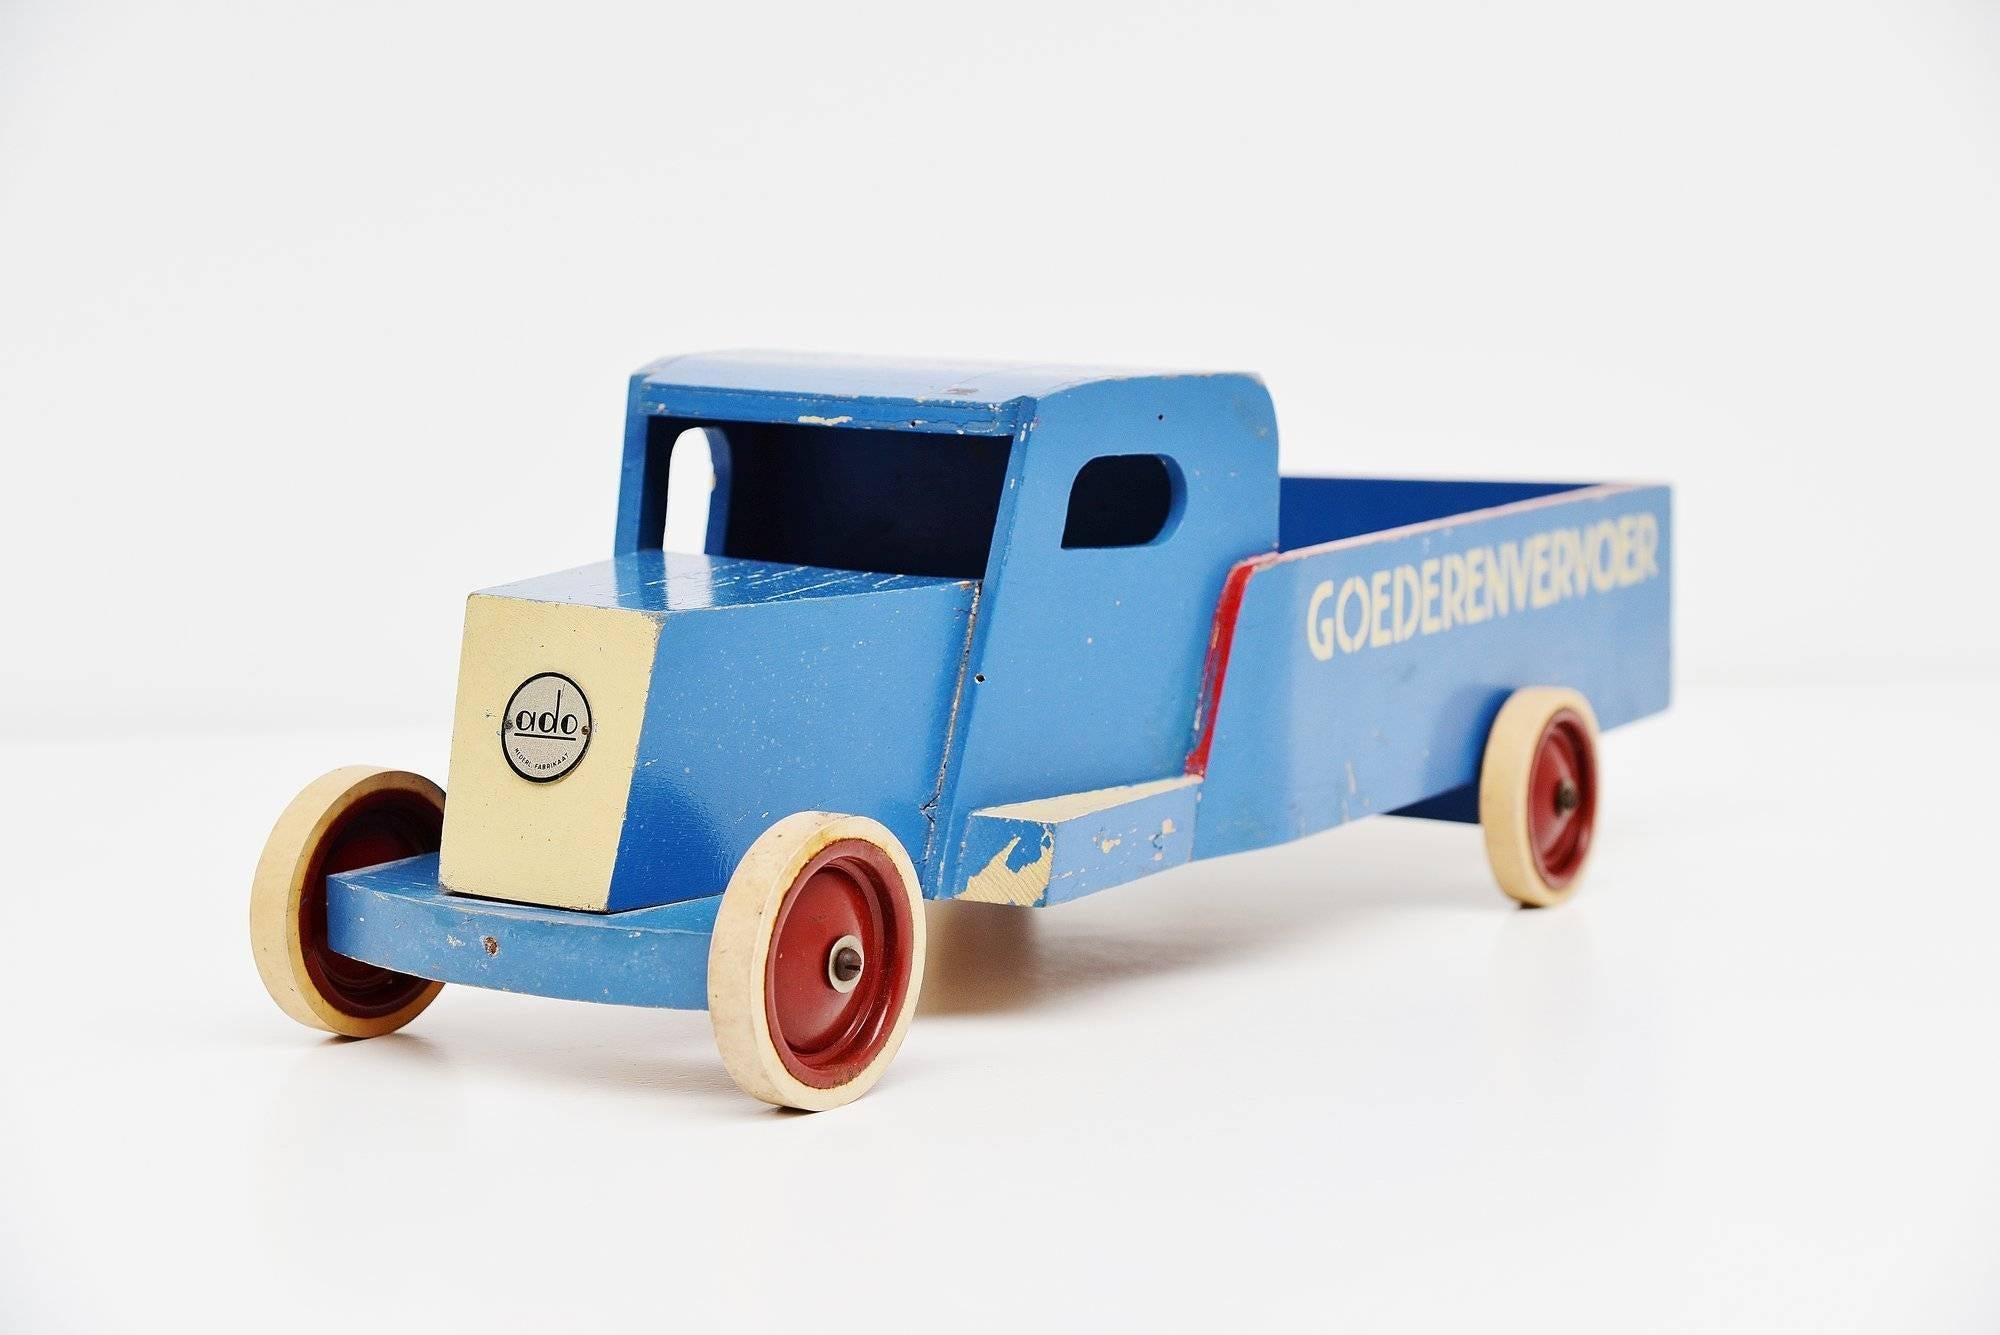 Very nice large toy goods transport (goederenvervoer) truck designed by Ko Verzuu for Ado Holland in circa 1940. Ado means Arbeid door onvolwaardigen, translated; labor by incapacitated, which makes this an even more special piece. Toys by Ado are